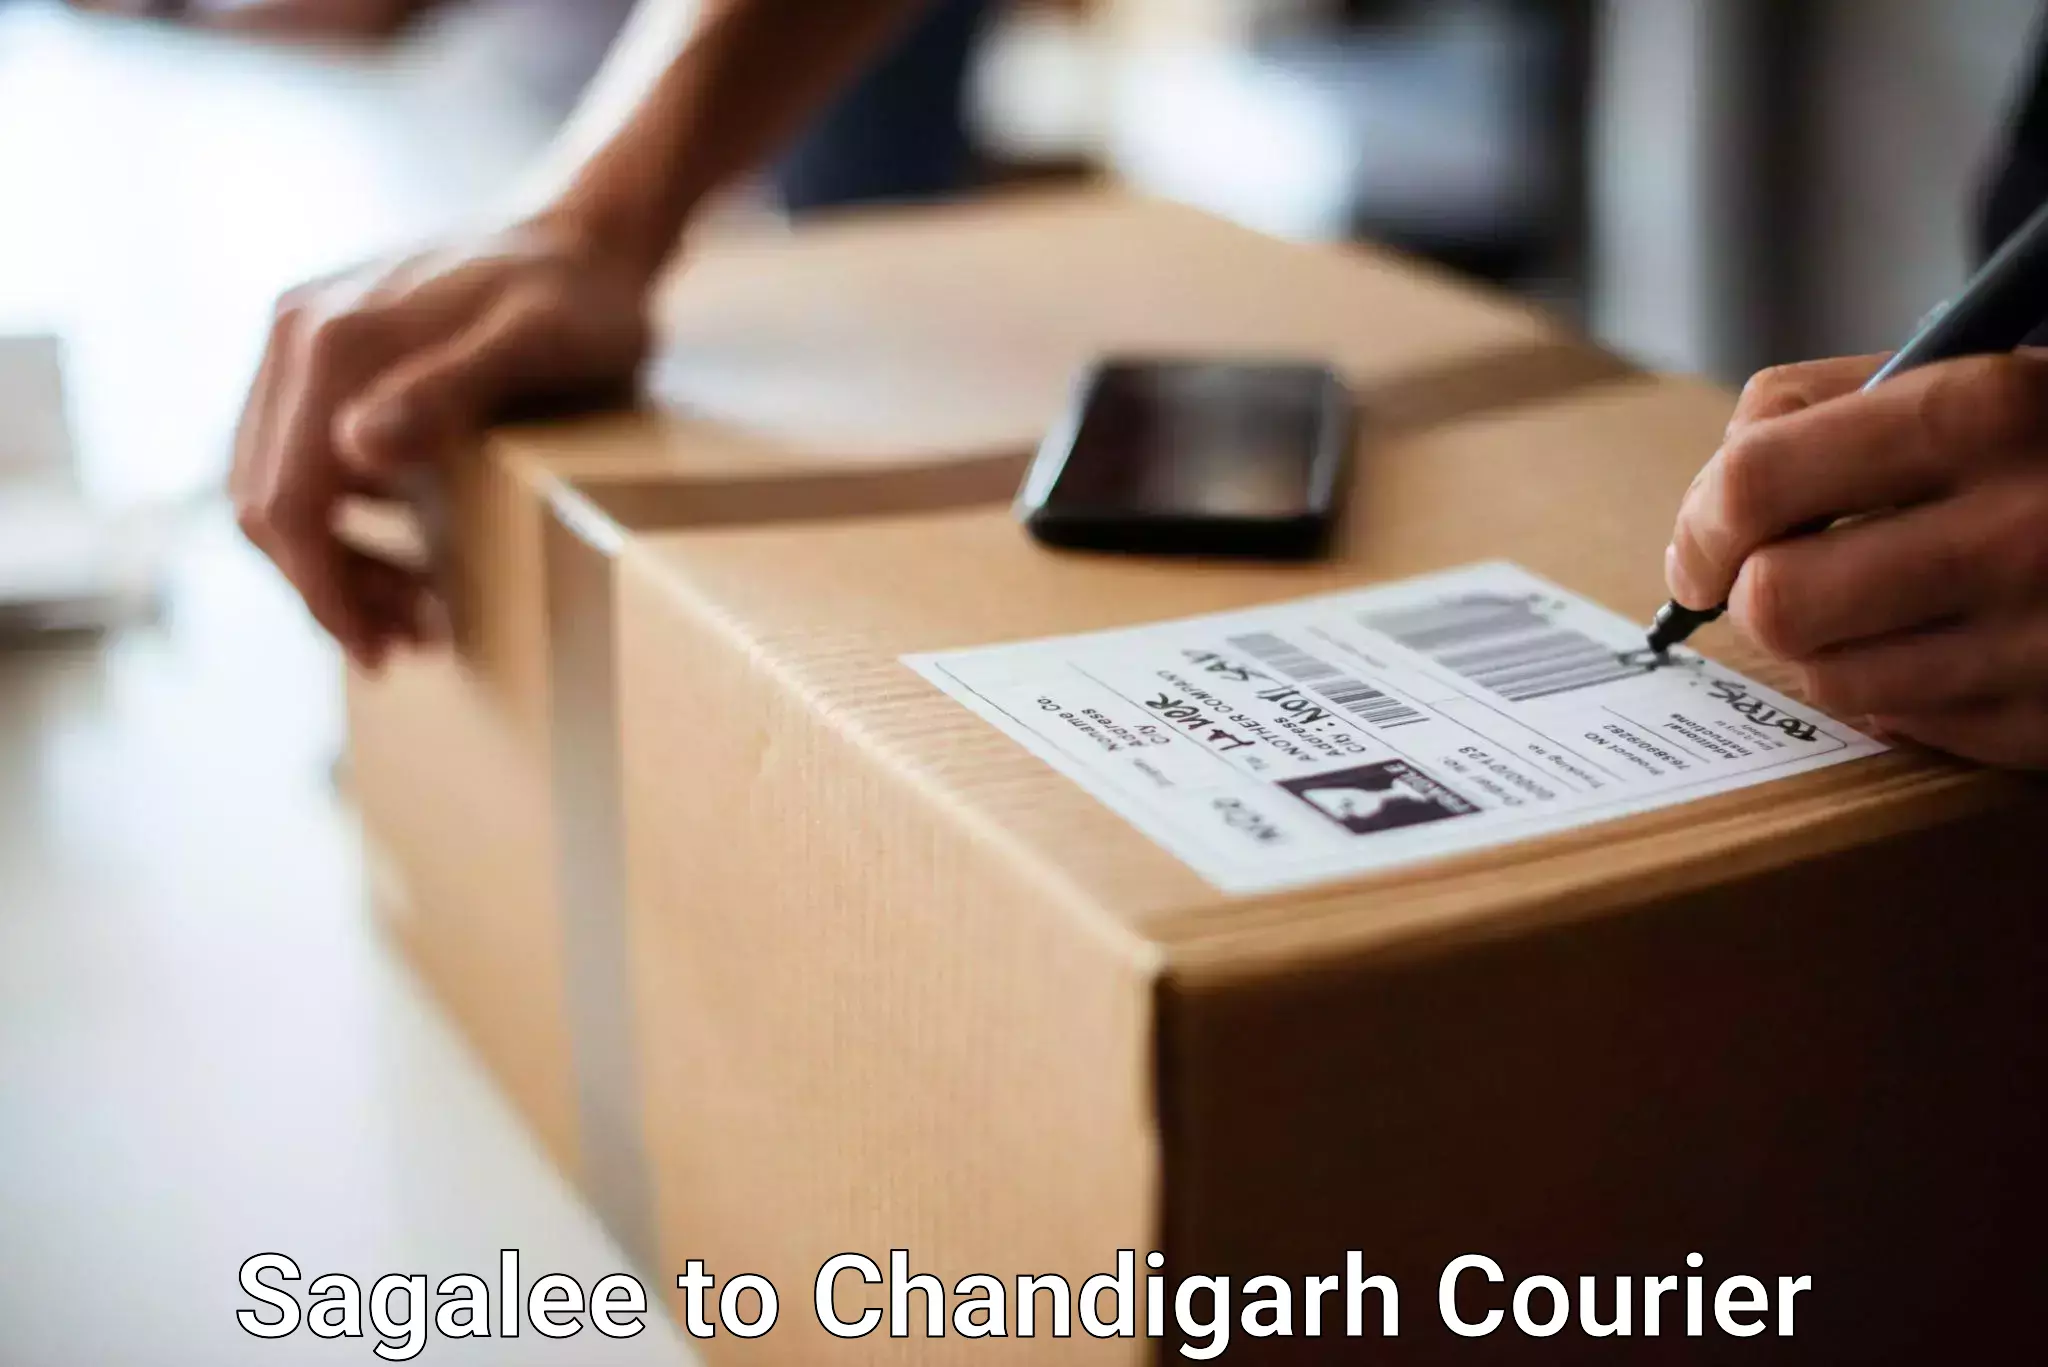 Personal effects shipping Sagalee to Chandigarh